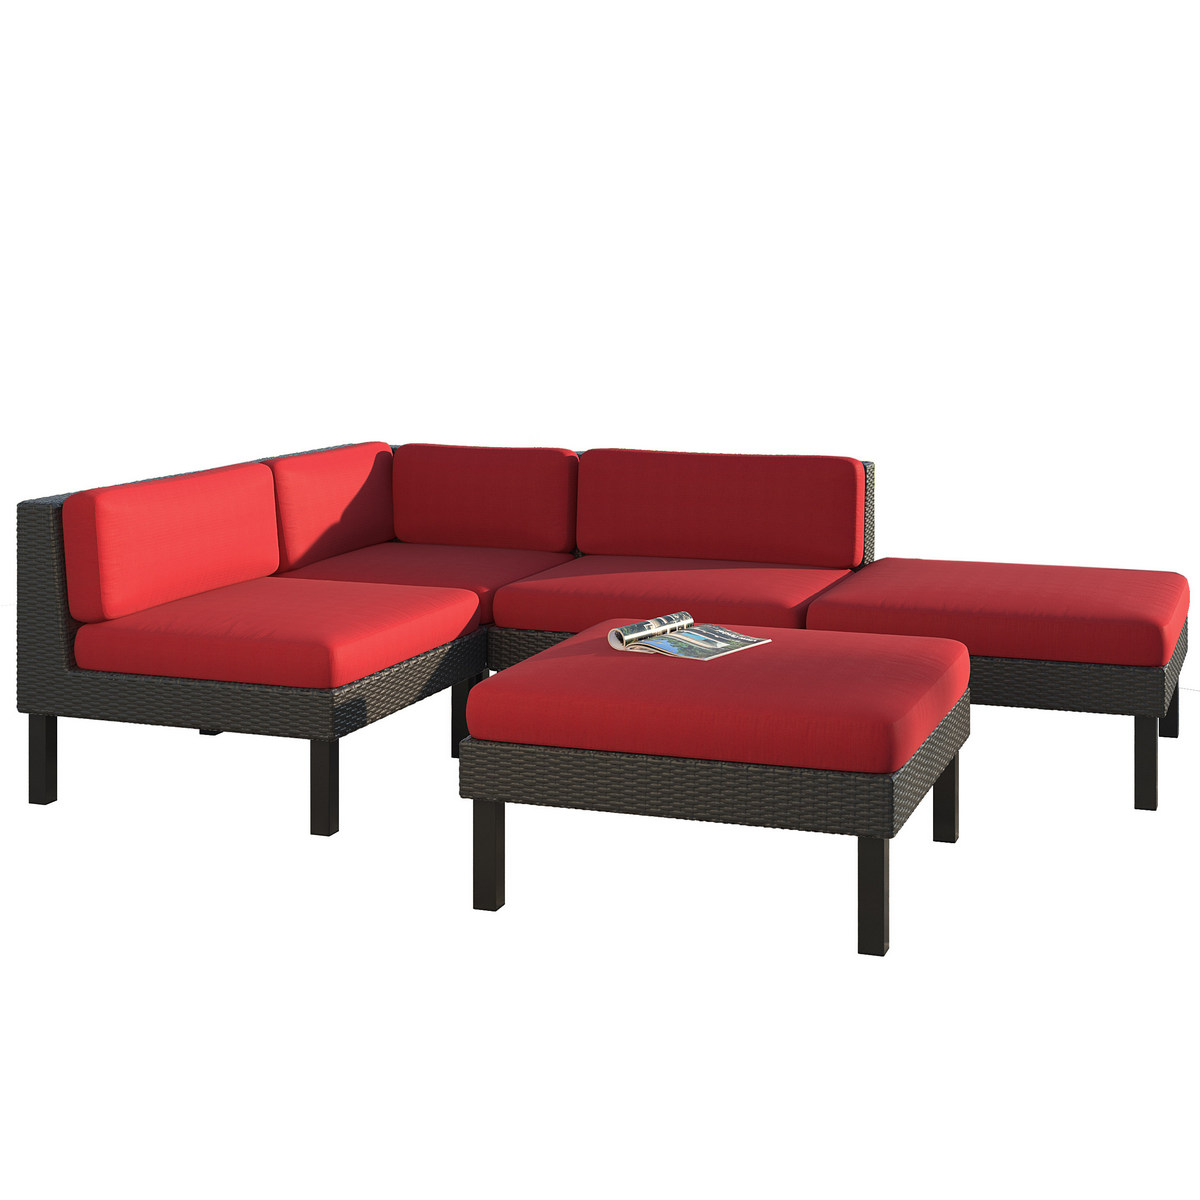 Corliving Sectional Chaise Lounge Patio Set